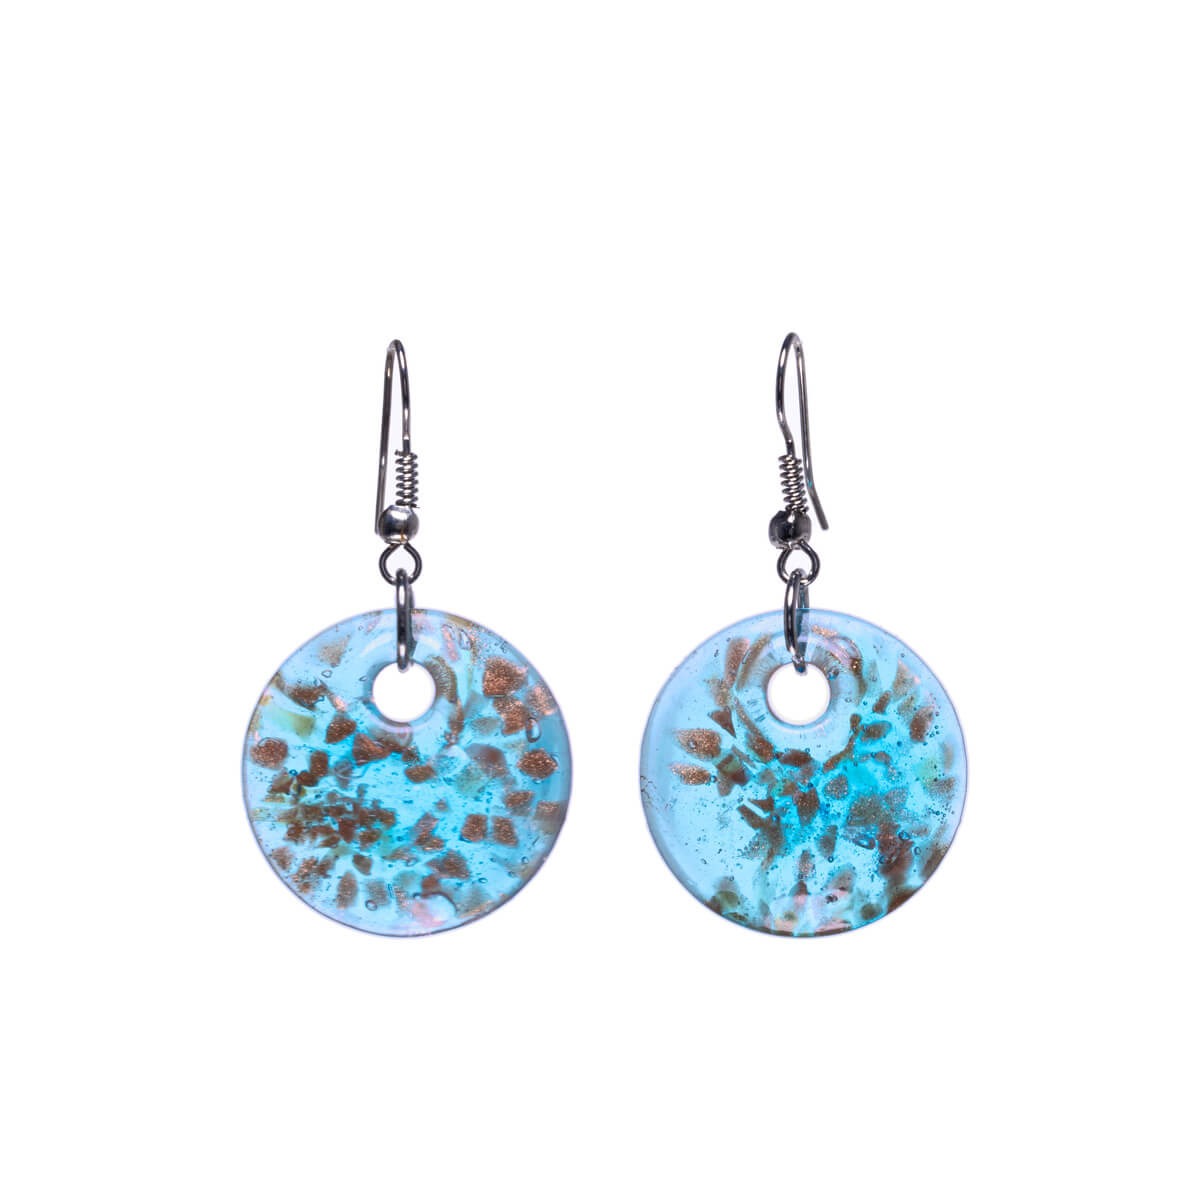 Sparkling decorative glass bead earrings